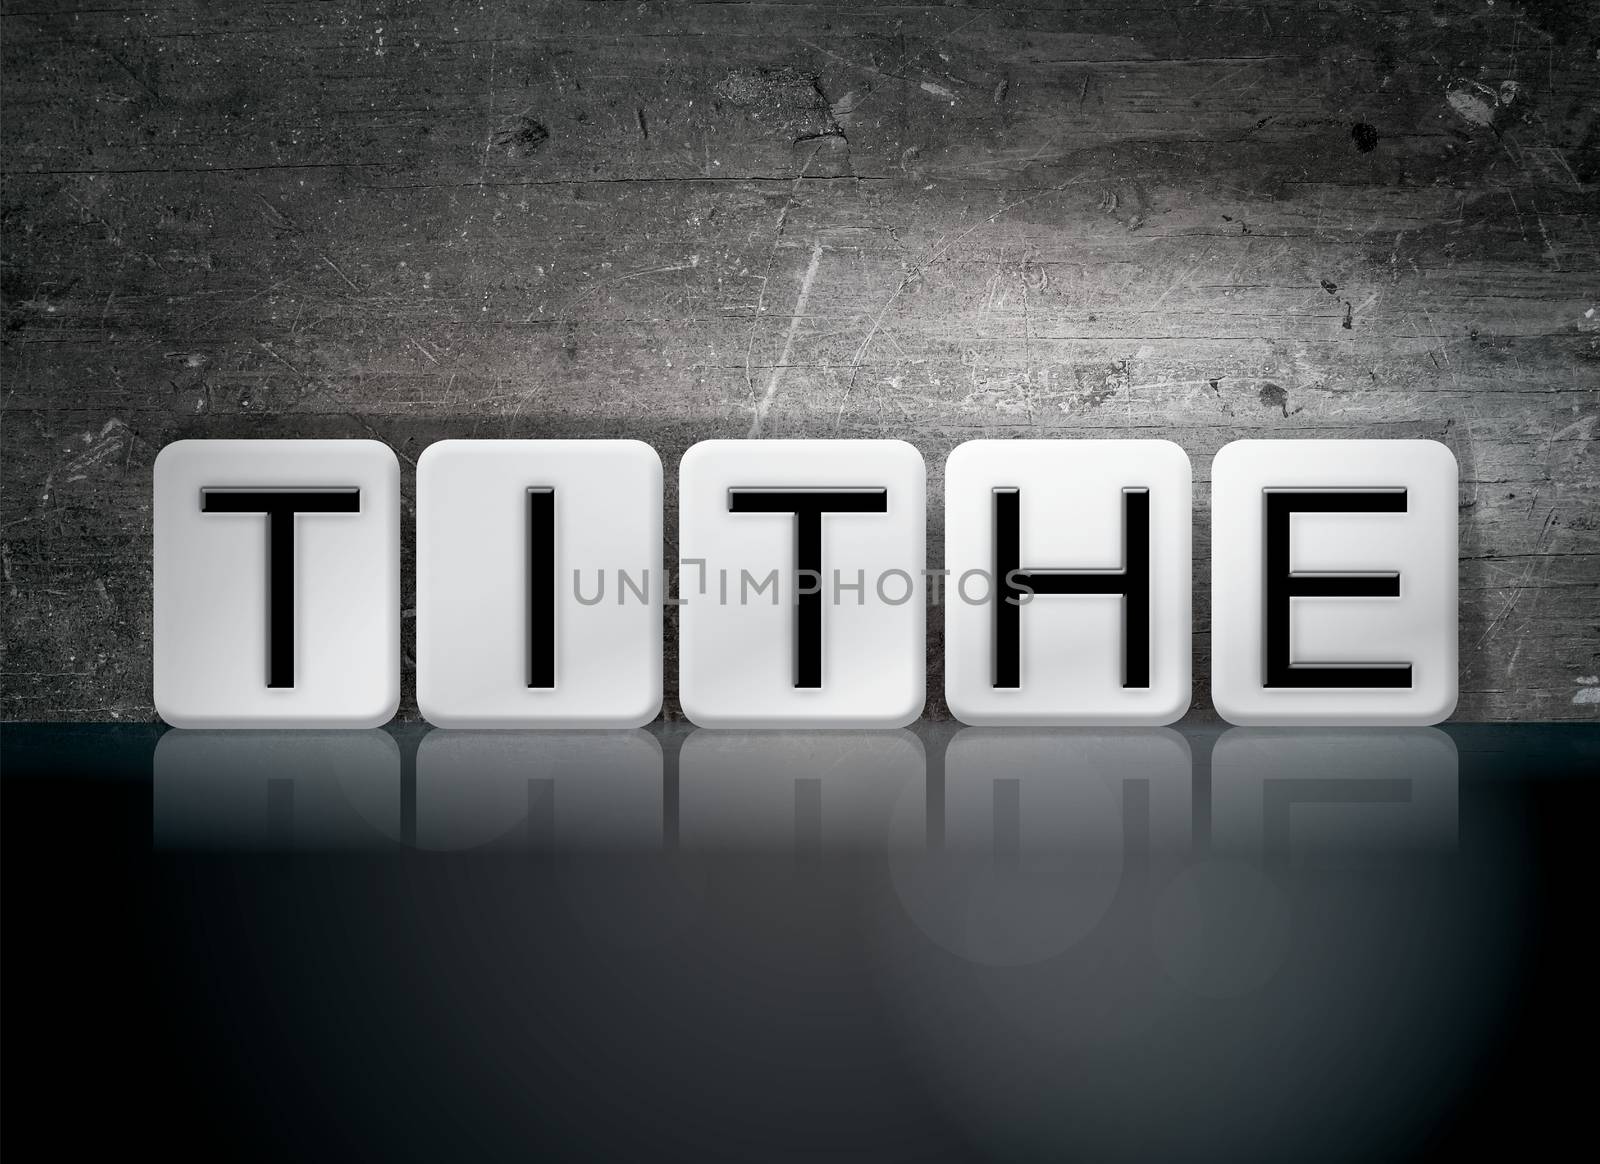 The word "Tithe" written in white tiles against a dark vintage grunge background.